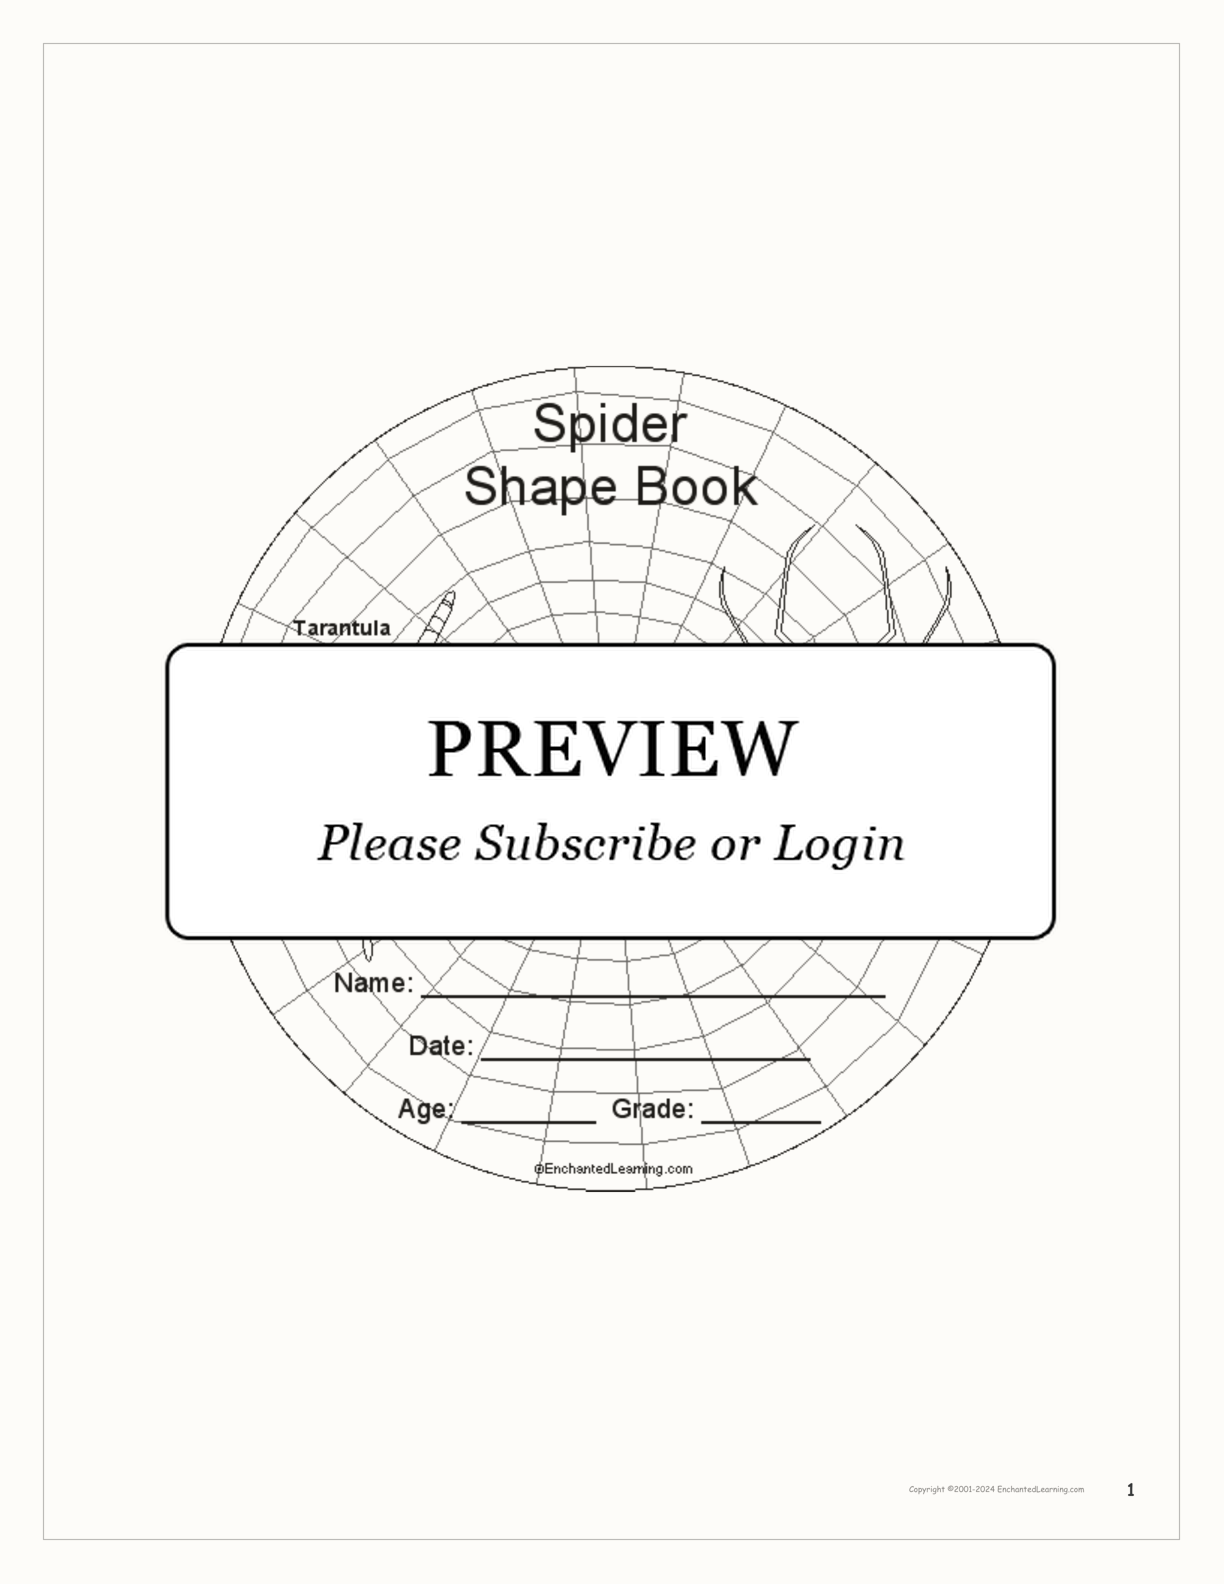 Spider Shape Book interactive worksheet page 1